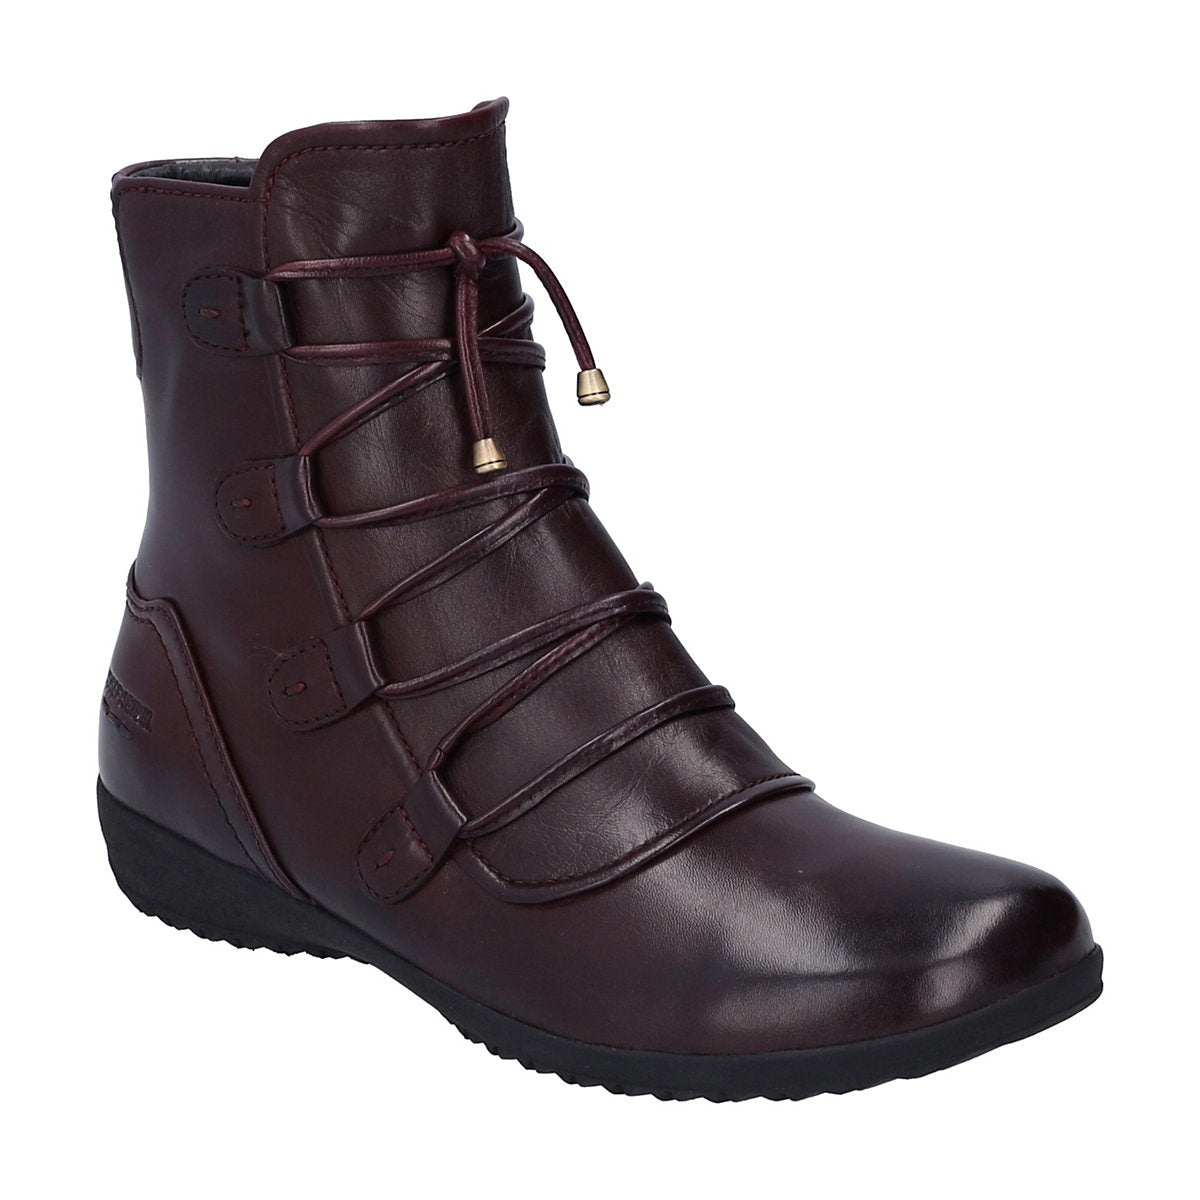 Josef Seibel Women's Naly 62 Leather Ankle Boots Bordeaux Red